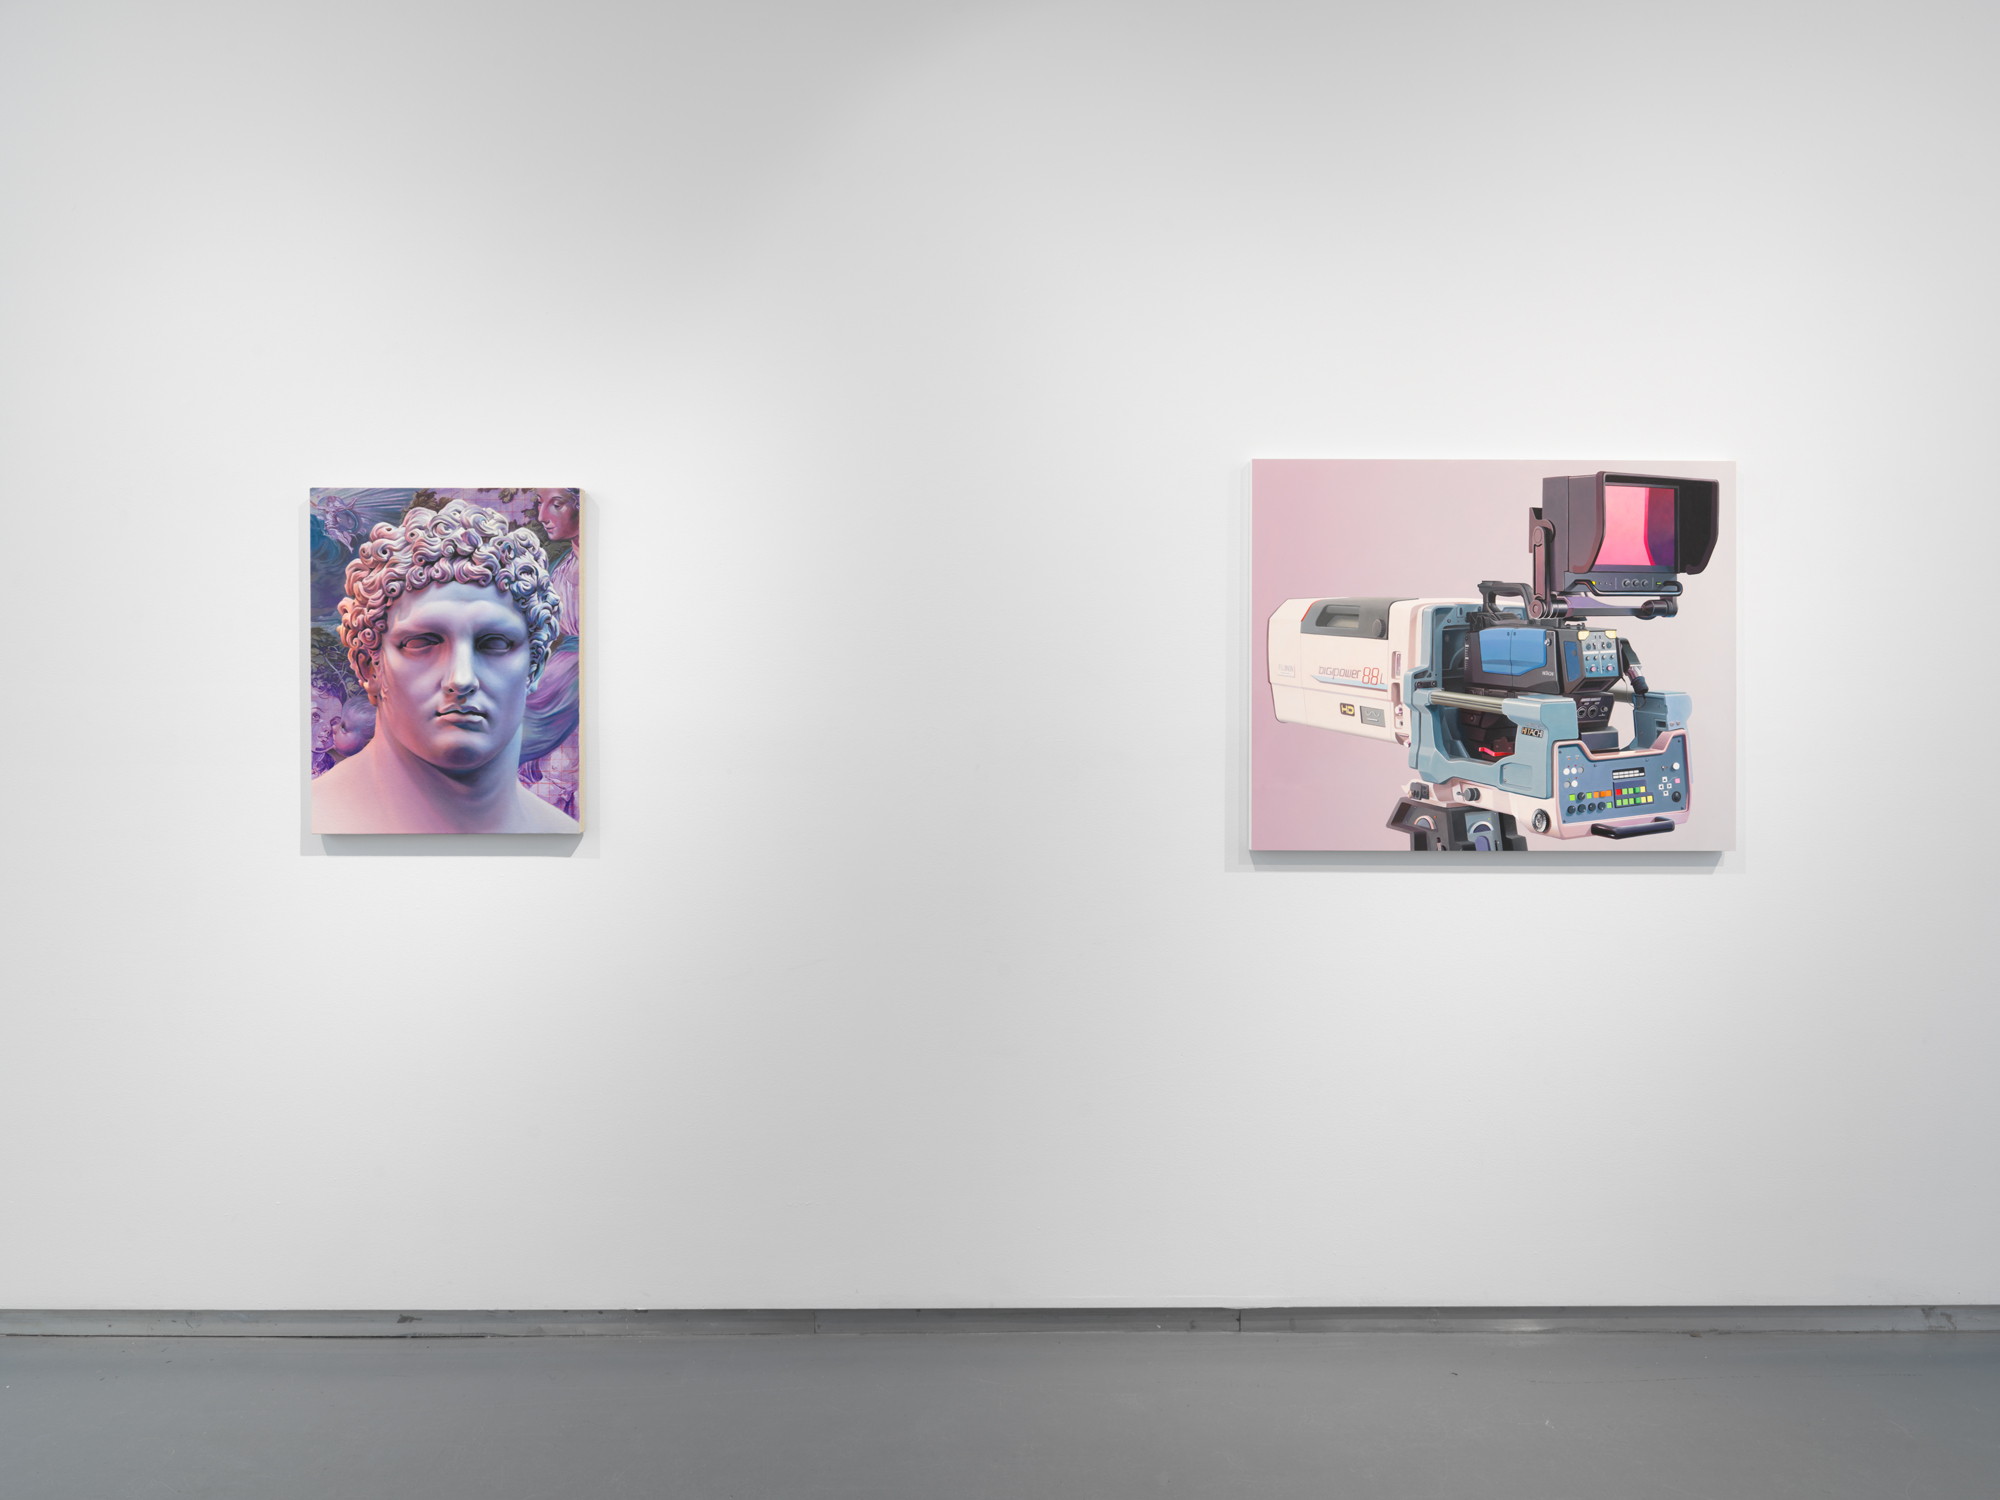 Installation view, Chason Matthams: A Hell for Rainbows, Thierry Goldberg Gallery, New York, NY 2019.